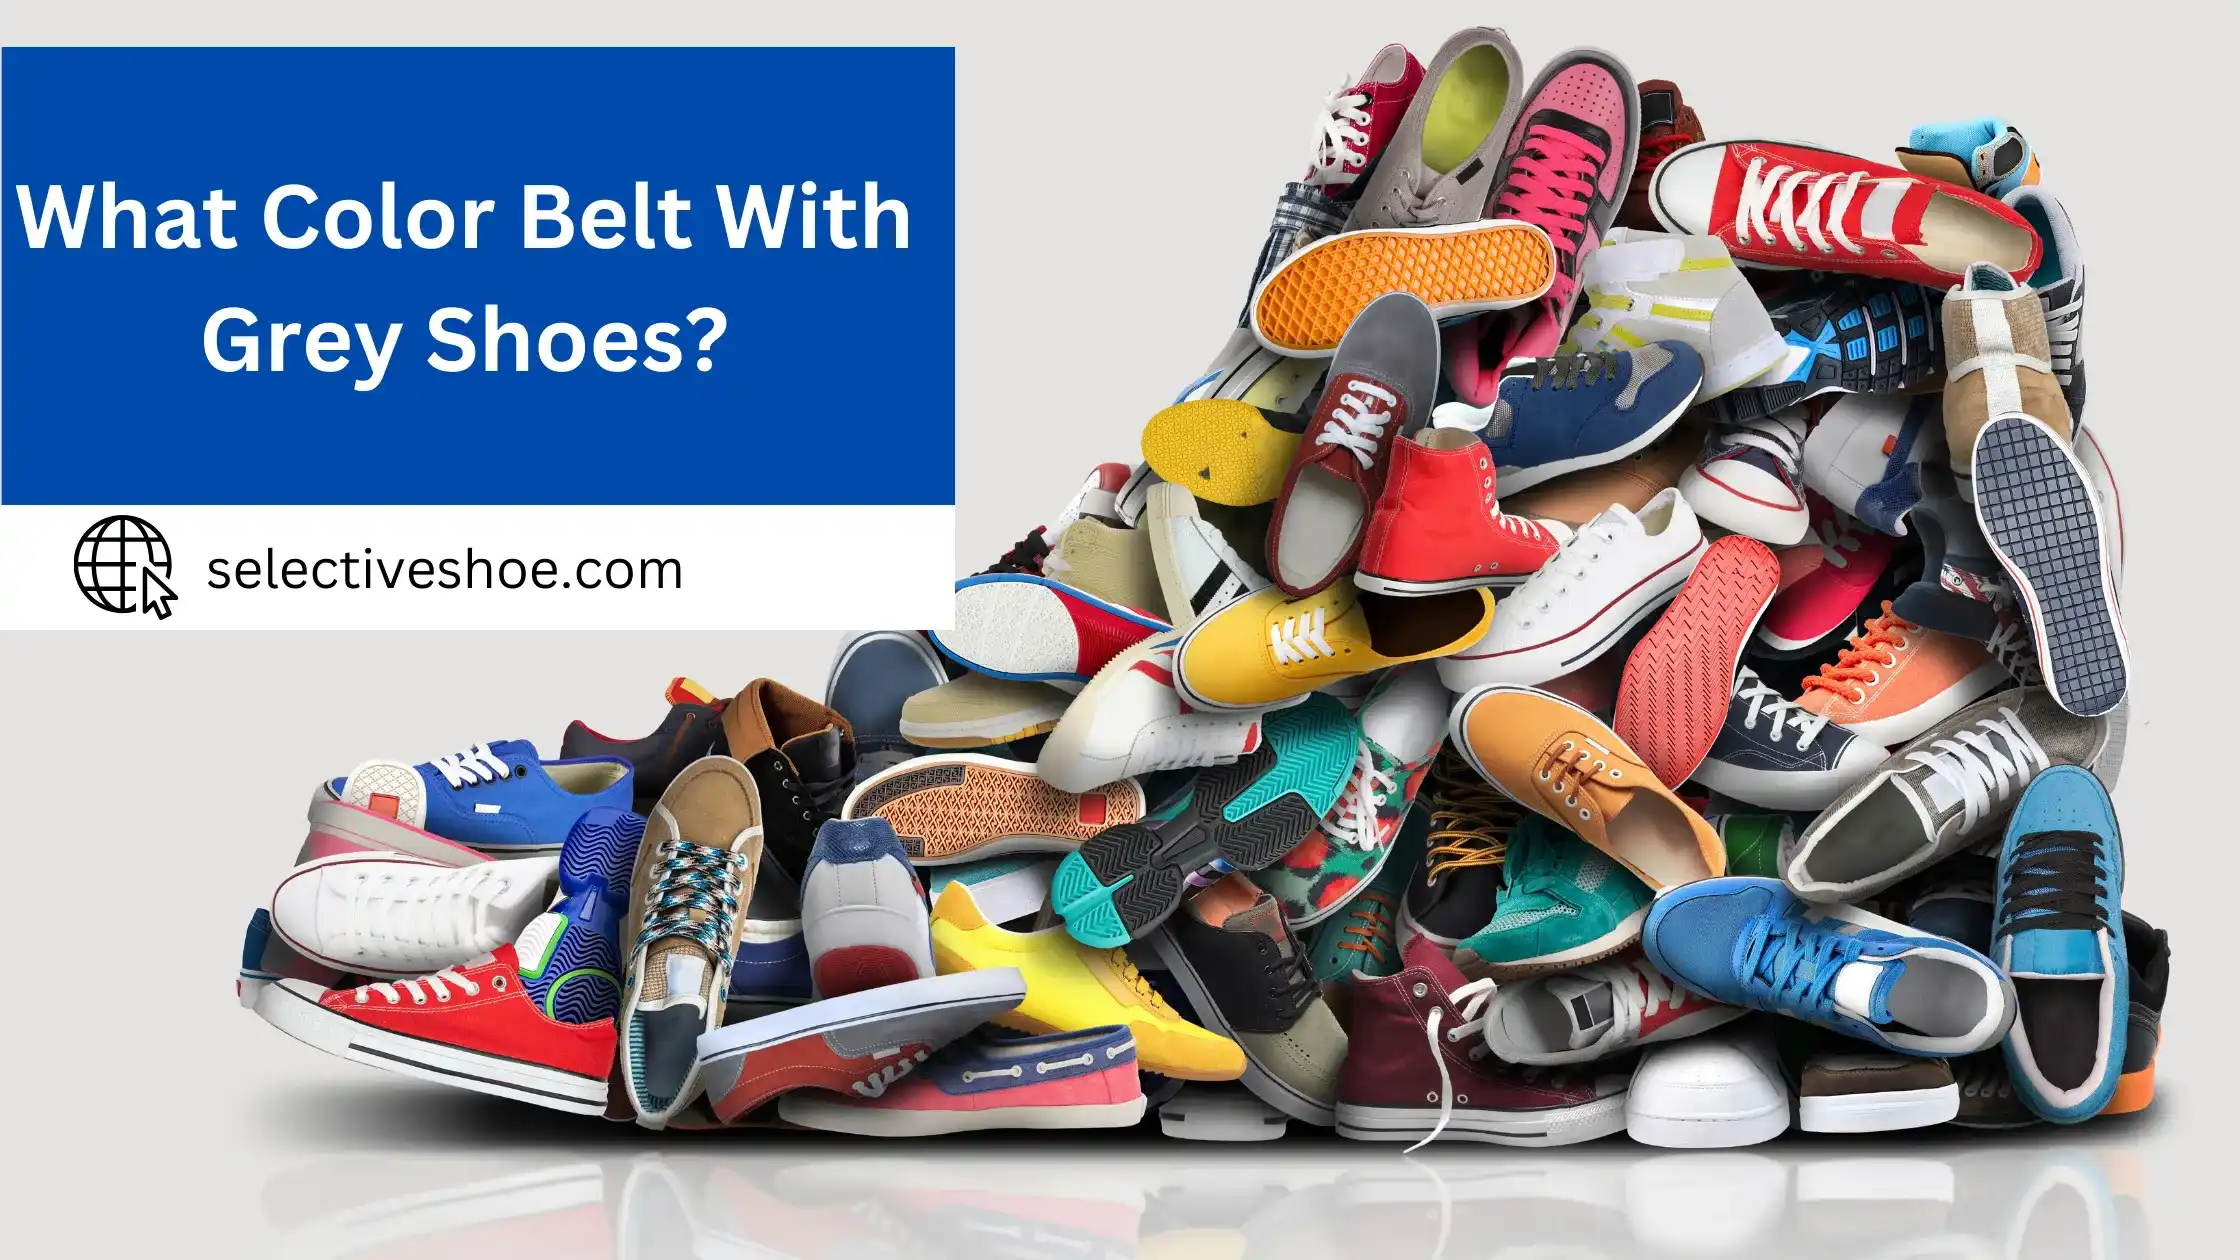 What Color Belt With Grey Shoes? Easy Guide For Everyone